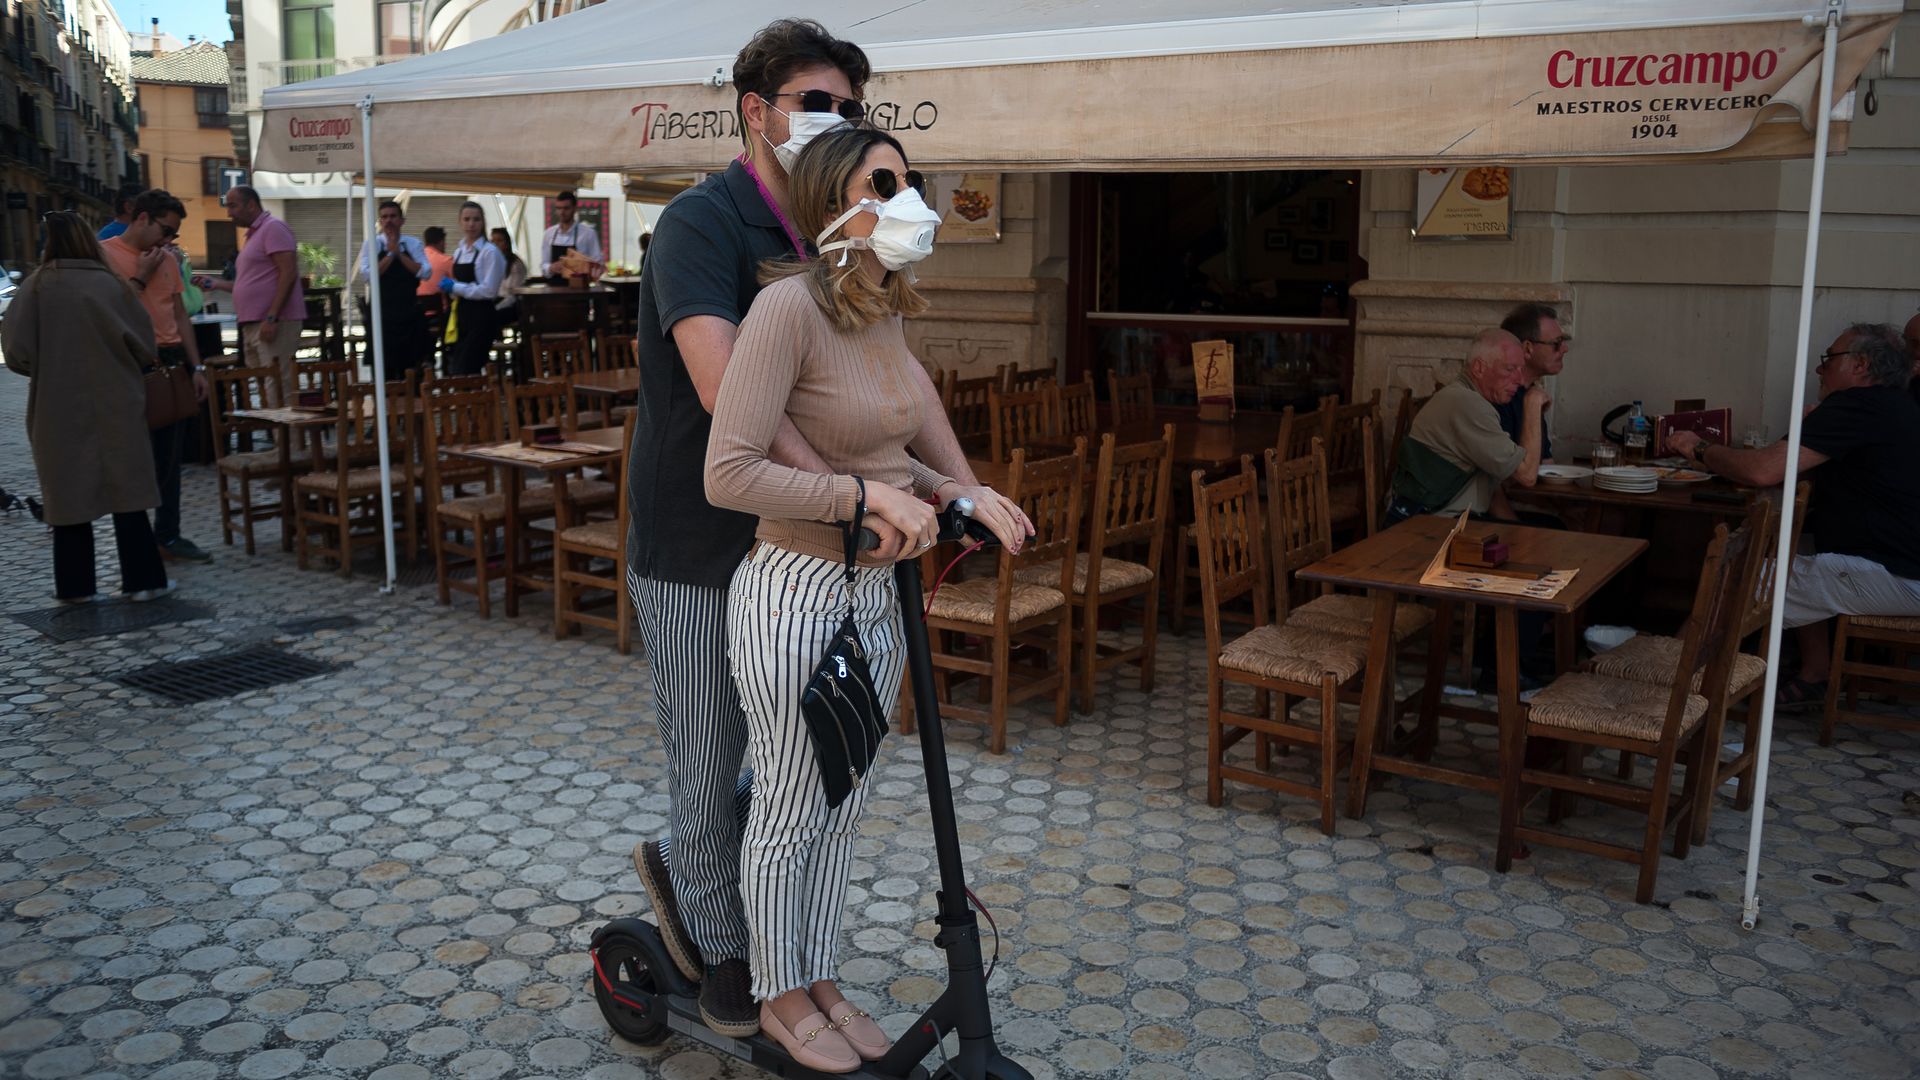 In this image, a man and a woman ride on an electric scooter while wearing face masks